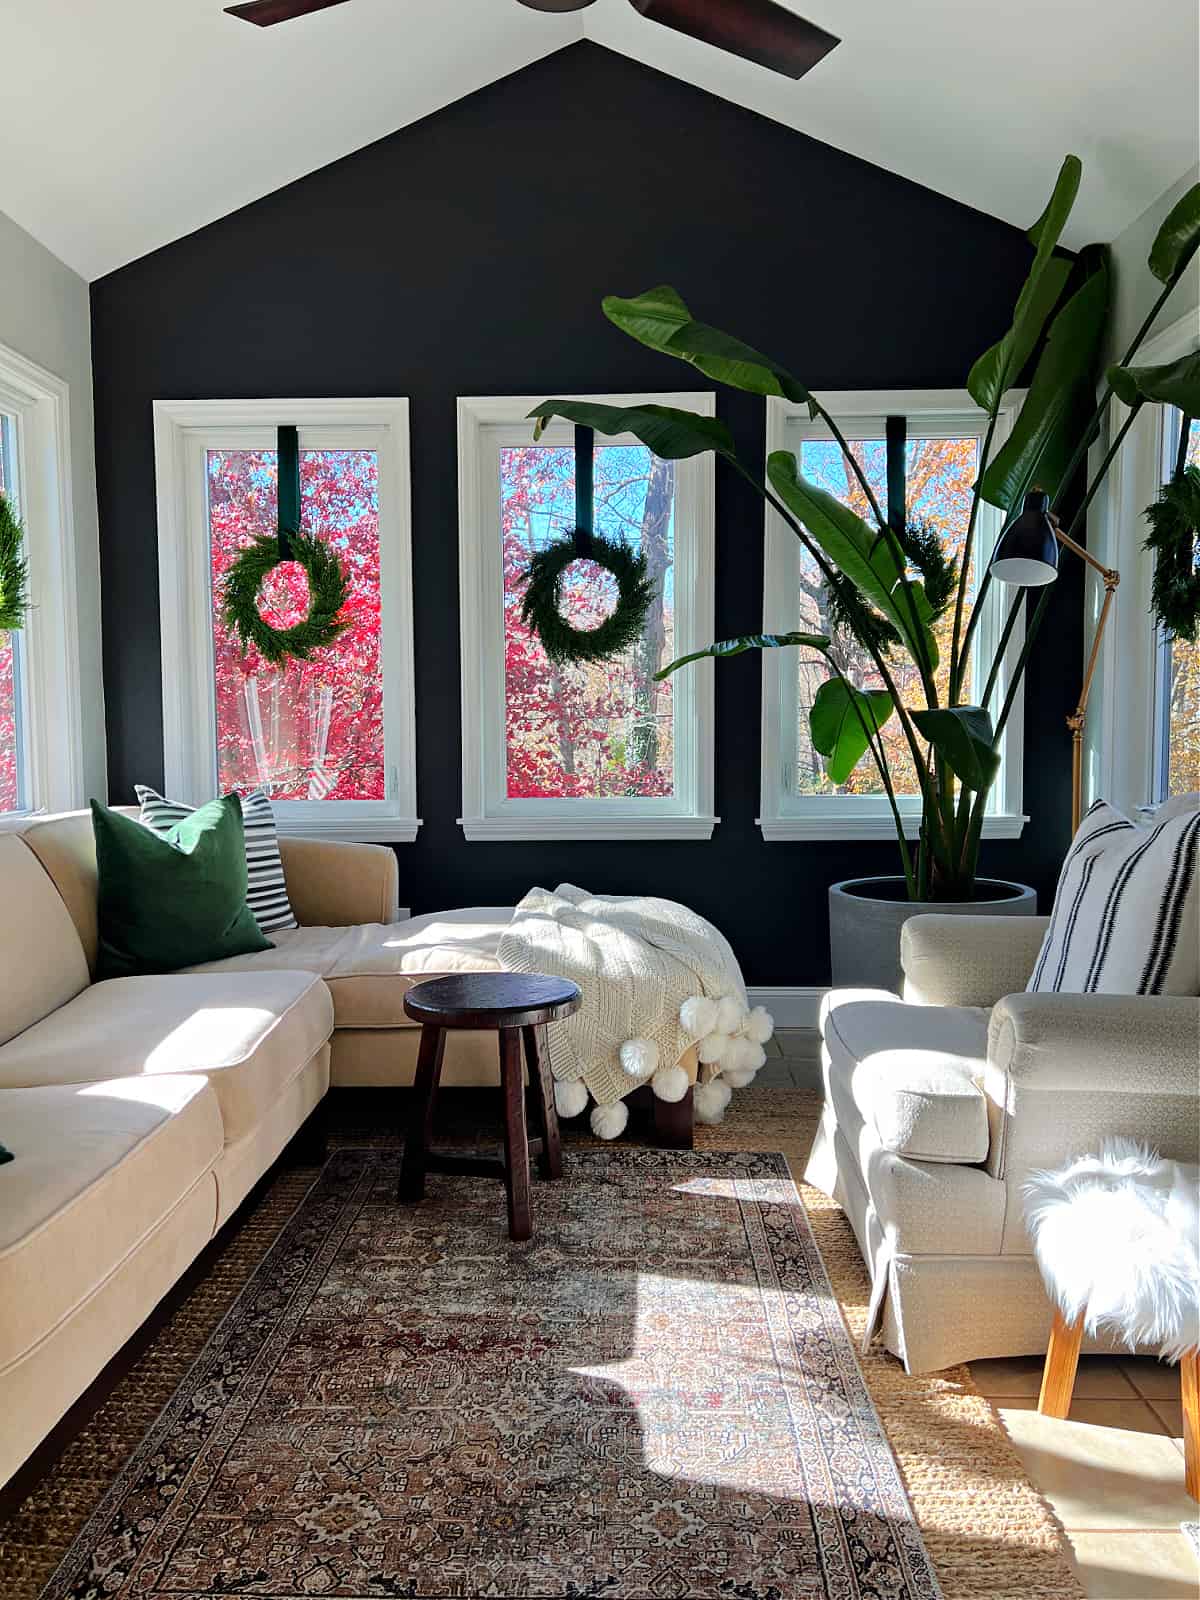 sunroom decorated for Christmas with wreaths hanging in windows